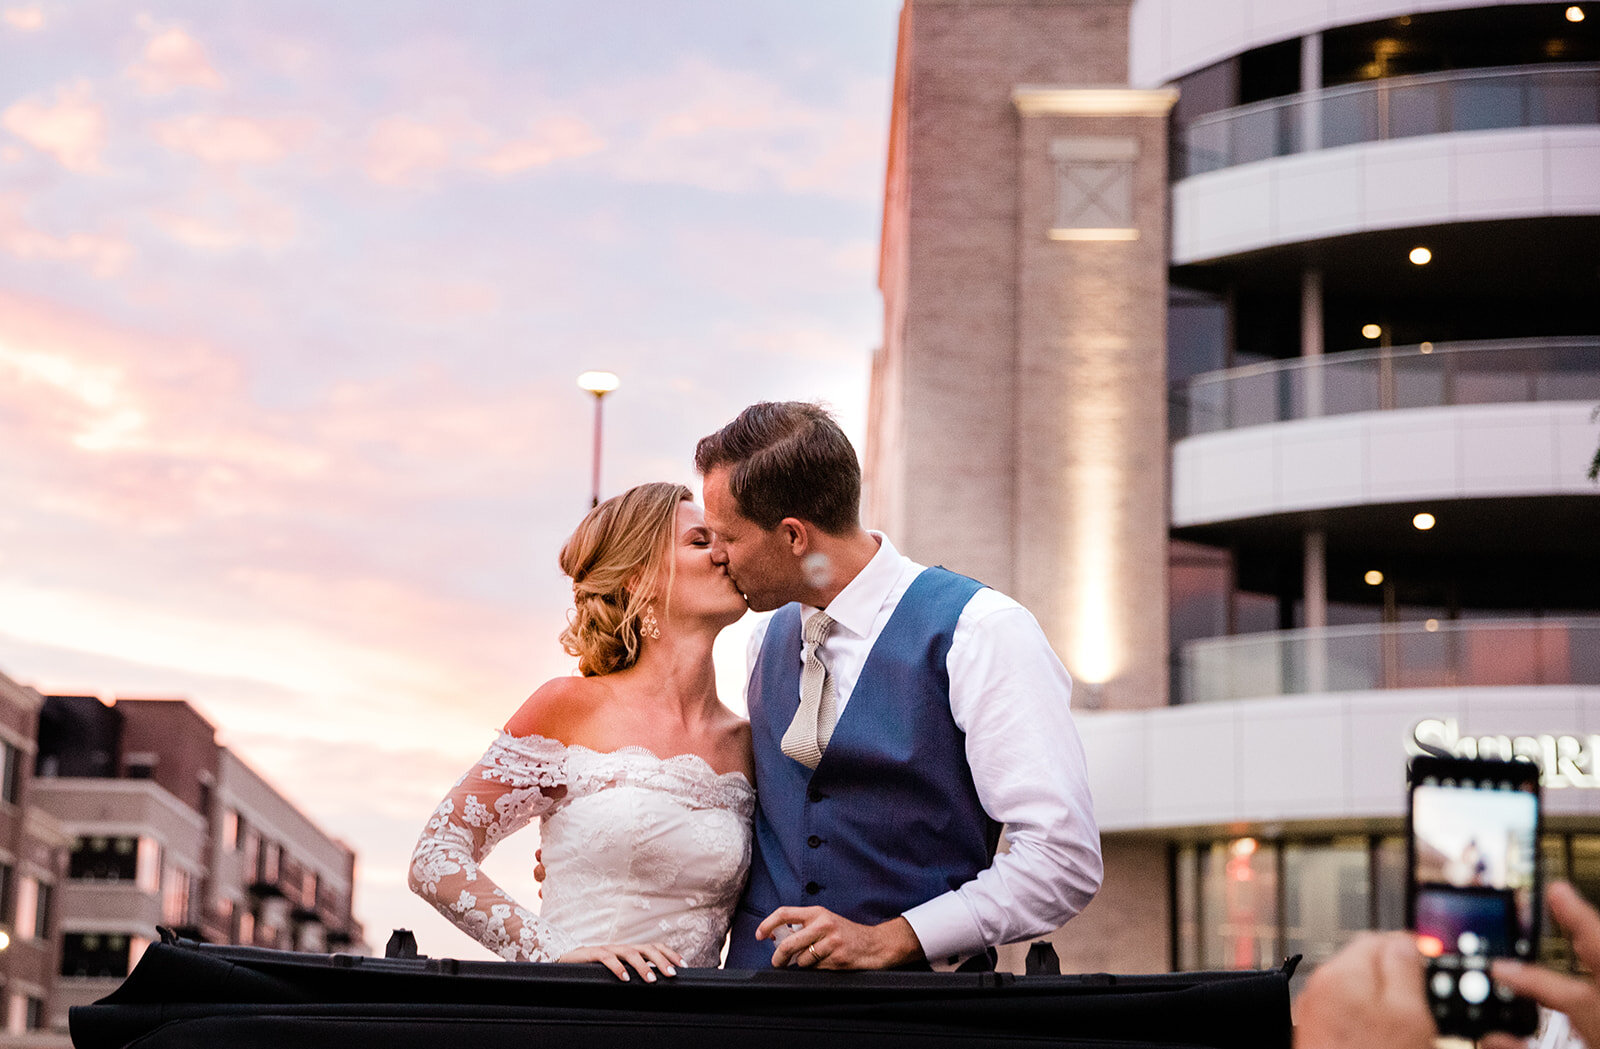 Romantic Intimate Wedding at a Coffee Shop captured by Expedition Joy on CHI thee WED